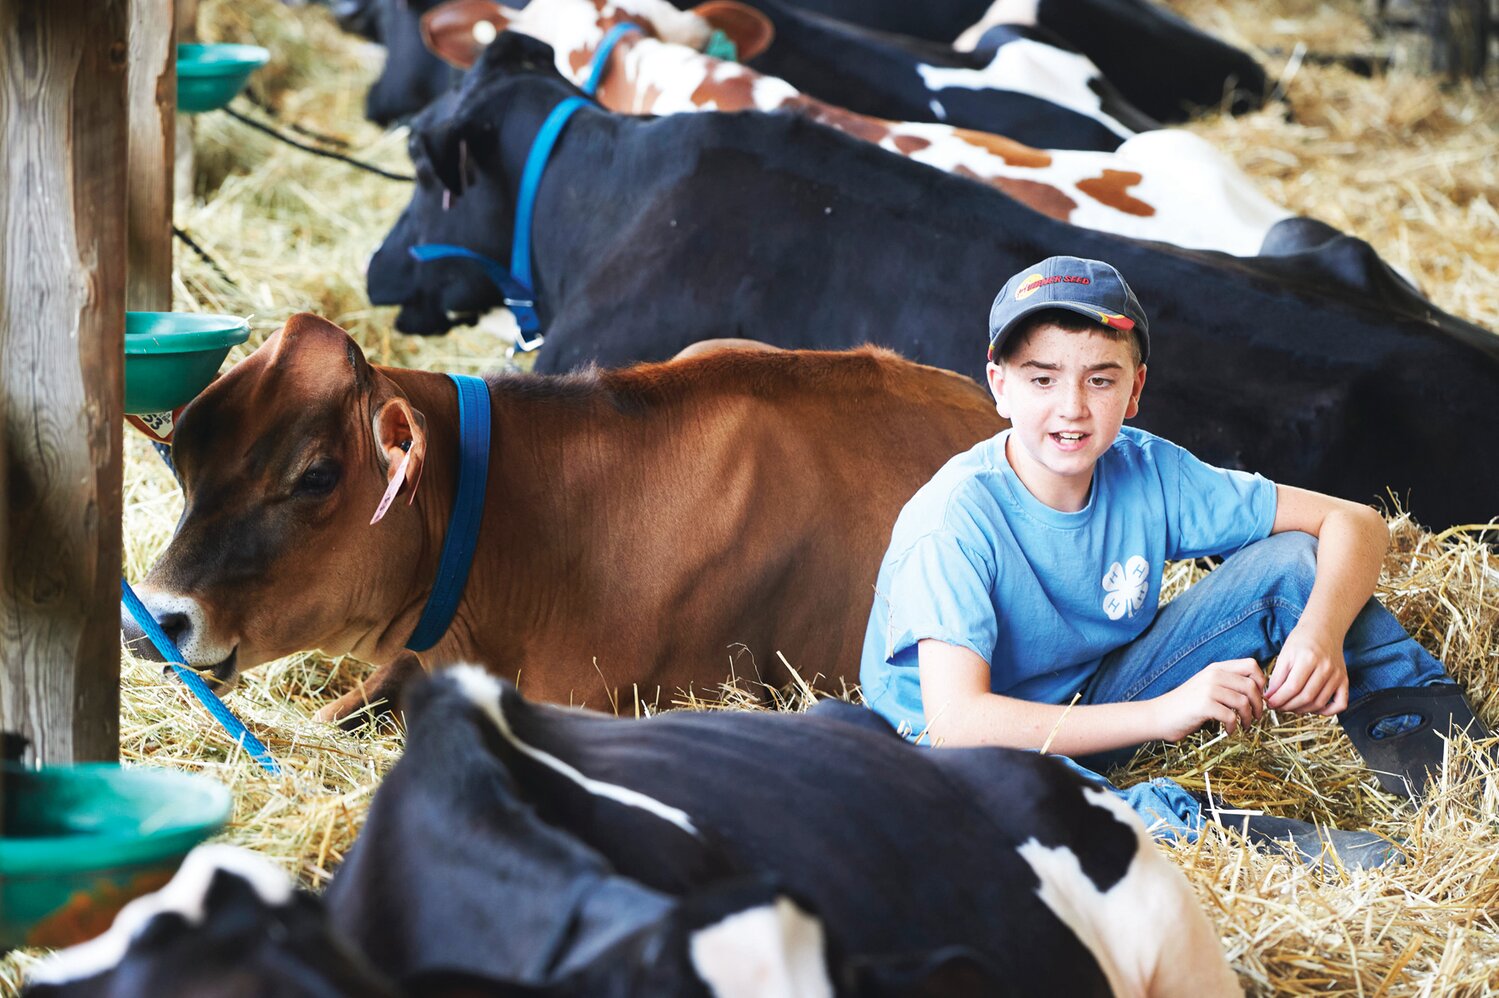 Logan Guillaume, 10, of Ivyland with his Jersey cow at the Middletown Grange Fair in Wrightstown Aug. 17.